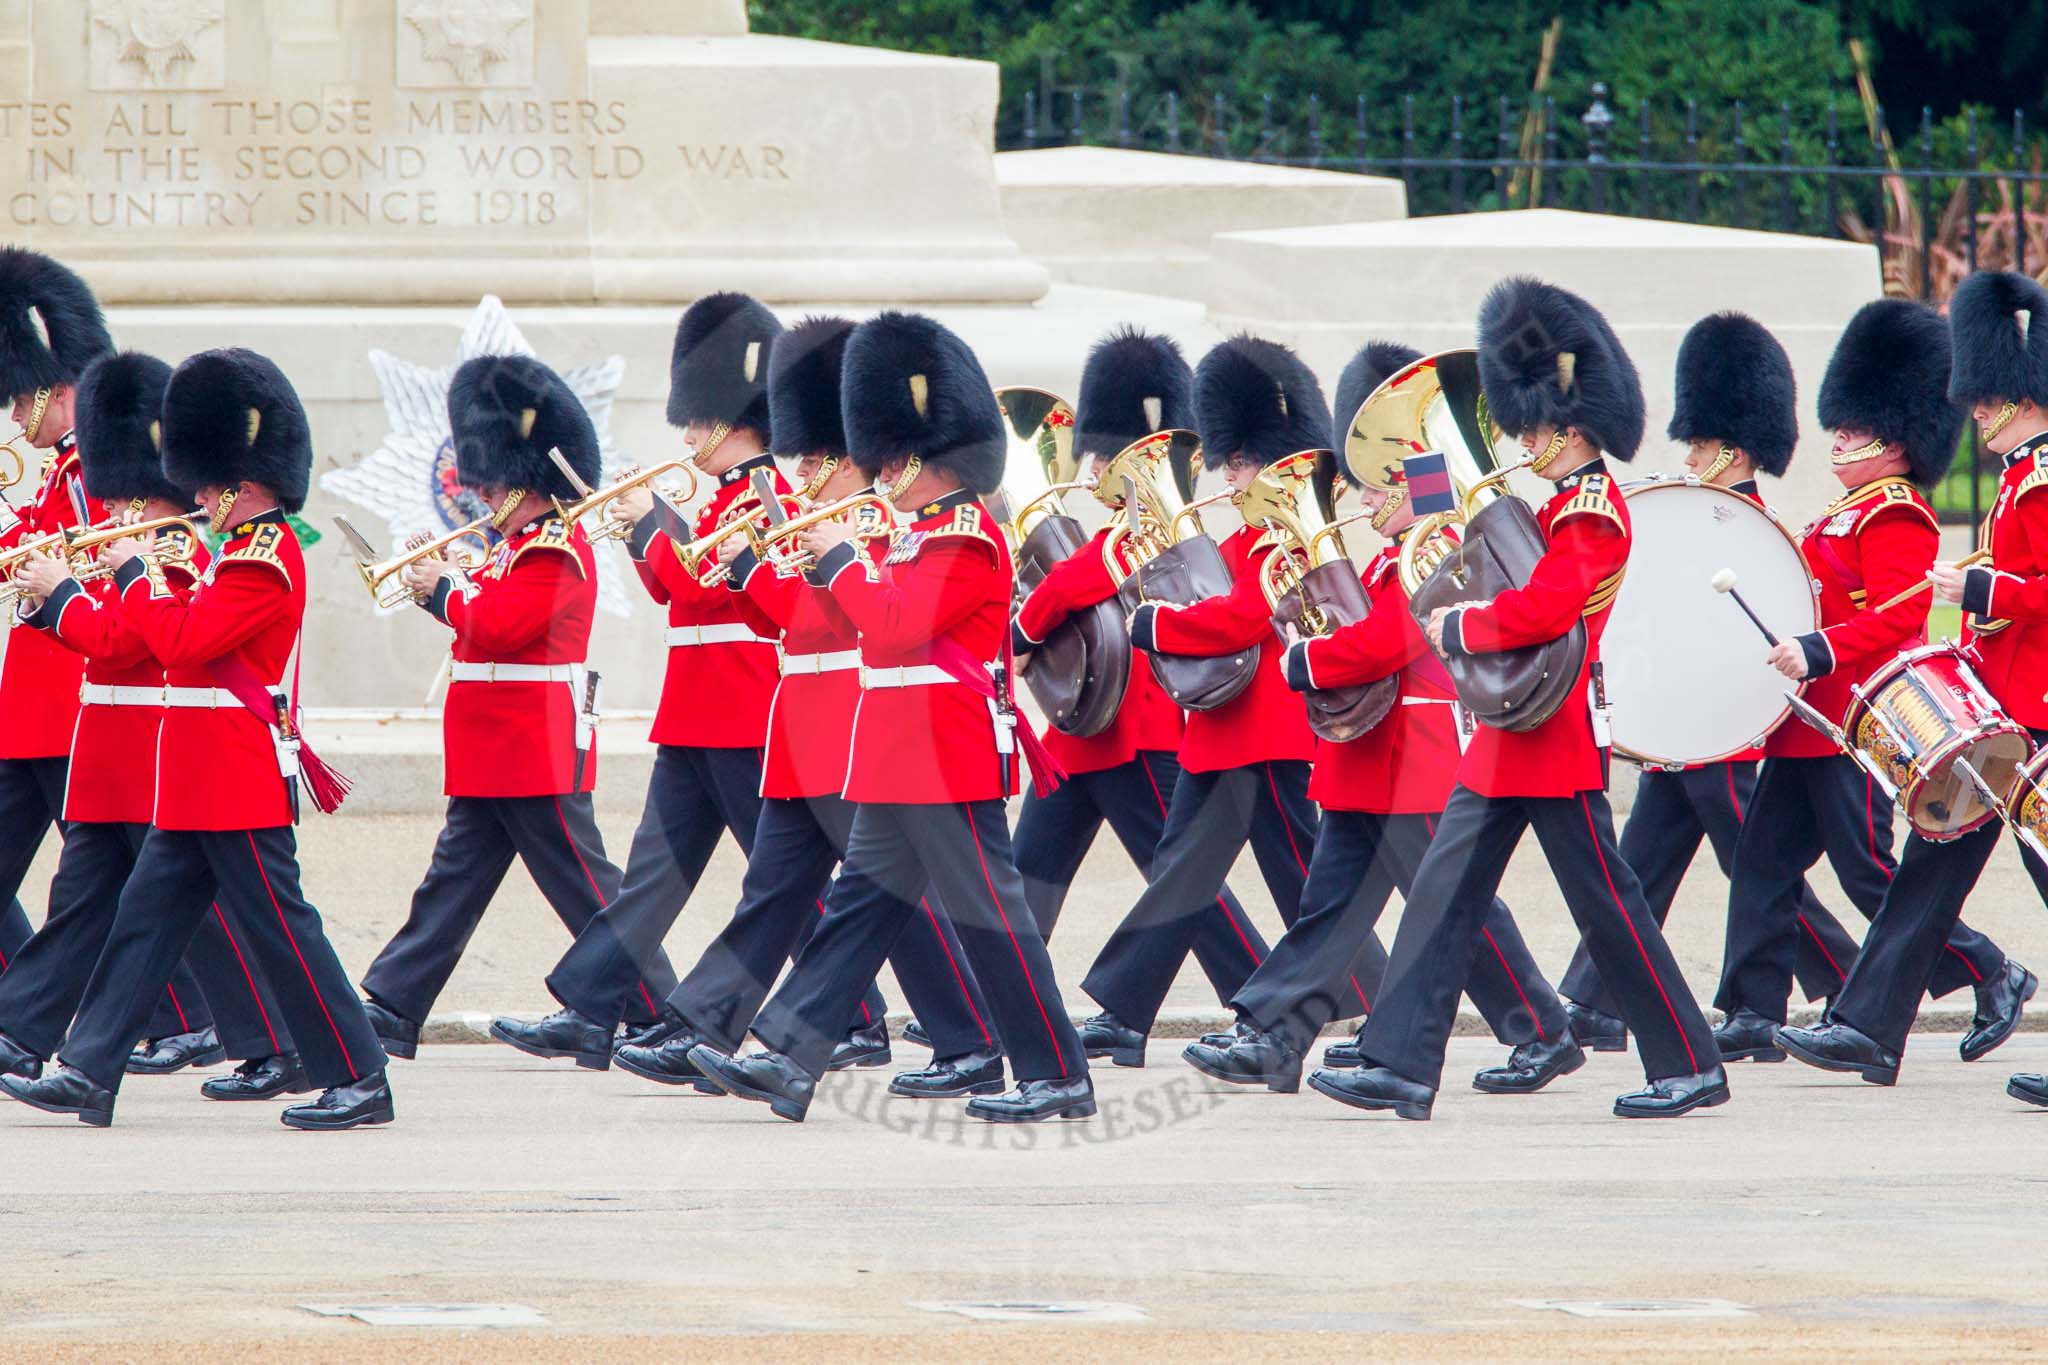 Trooping the Colour 2014.
Horse Guards Parade, Westminster,
London SW1A,

United Kingdom,
on 14 June 2014 at 10:29, image #171